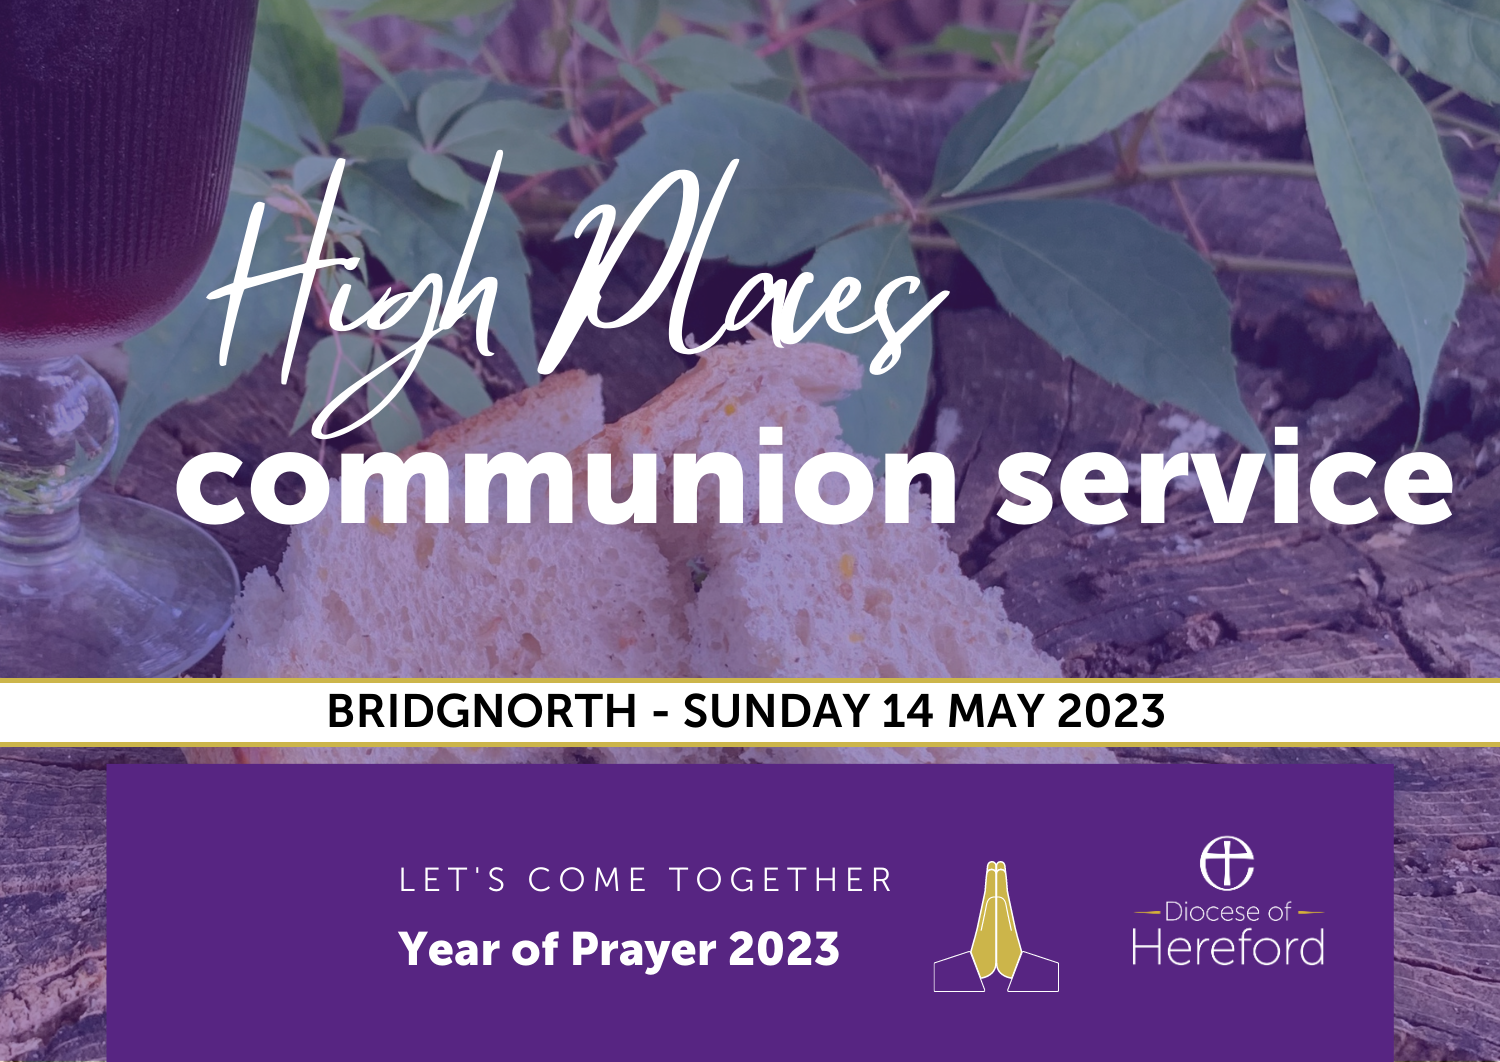 Bread and Wine - invitation to Holy Communion Service